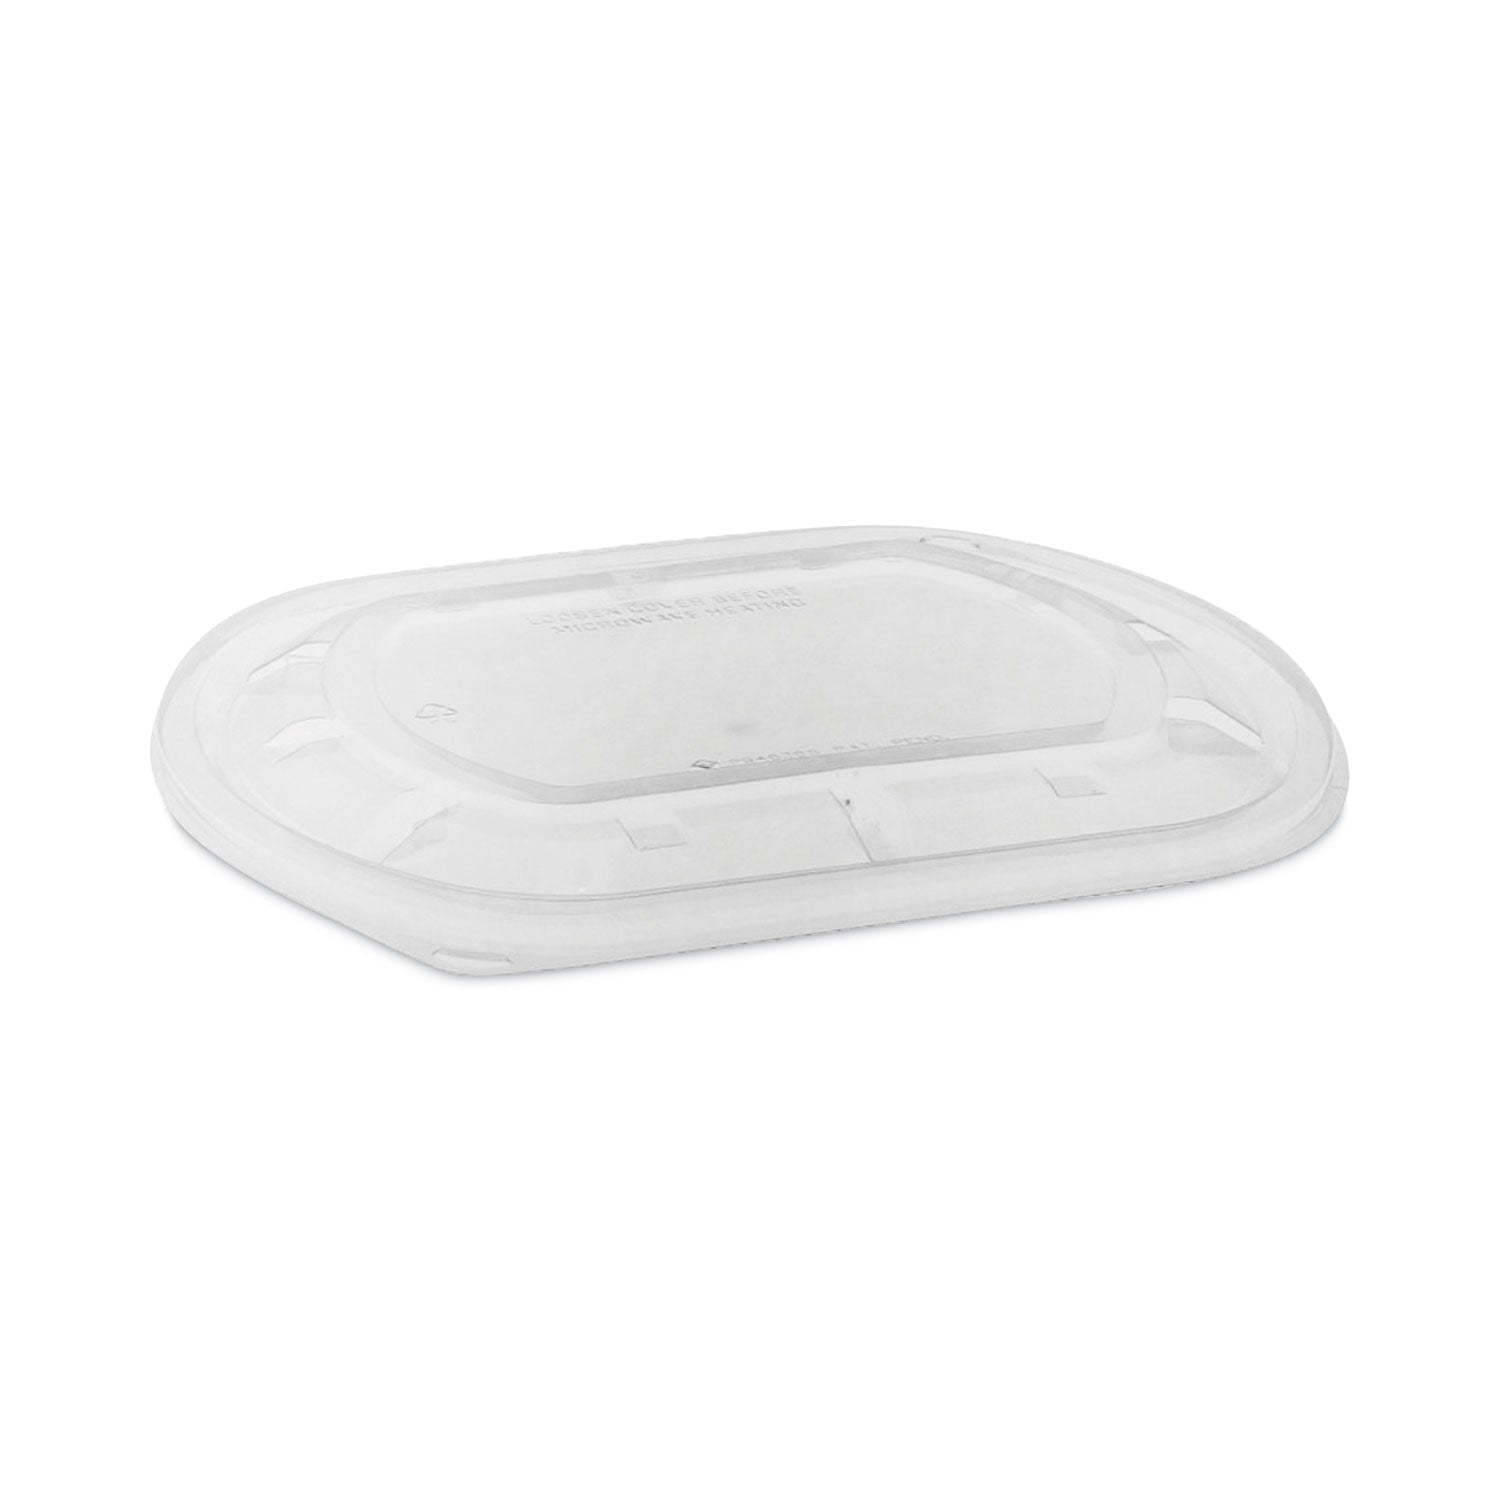 clearview-mealmaster-lid-with-fog-gard-coating-large-flat-lid-938-x-8-x-038-clear-plastic-300-carton_pctycn8463s00d0 - 1